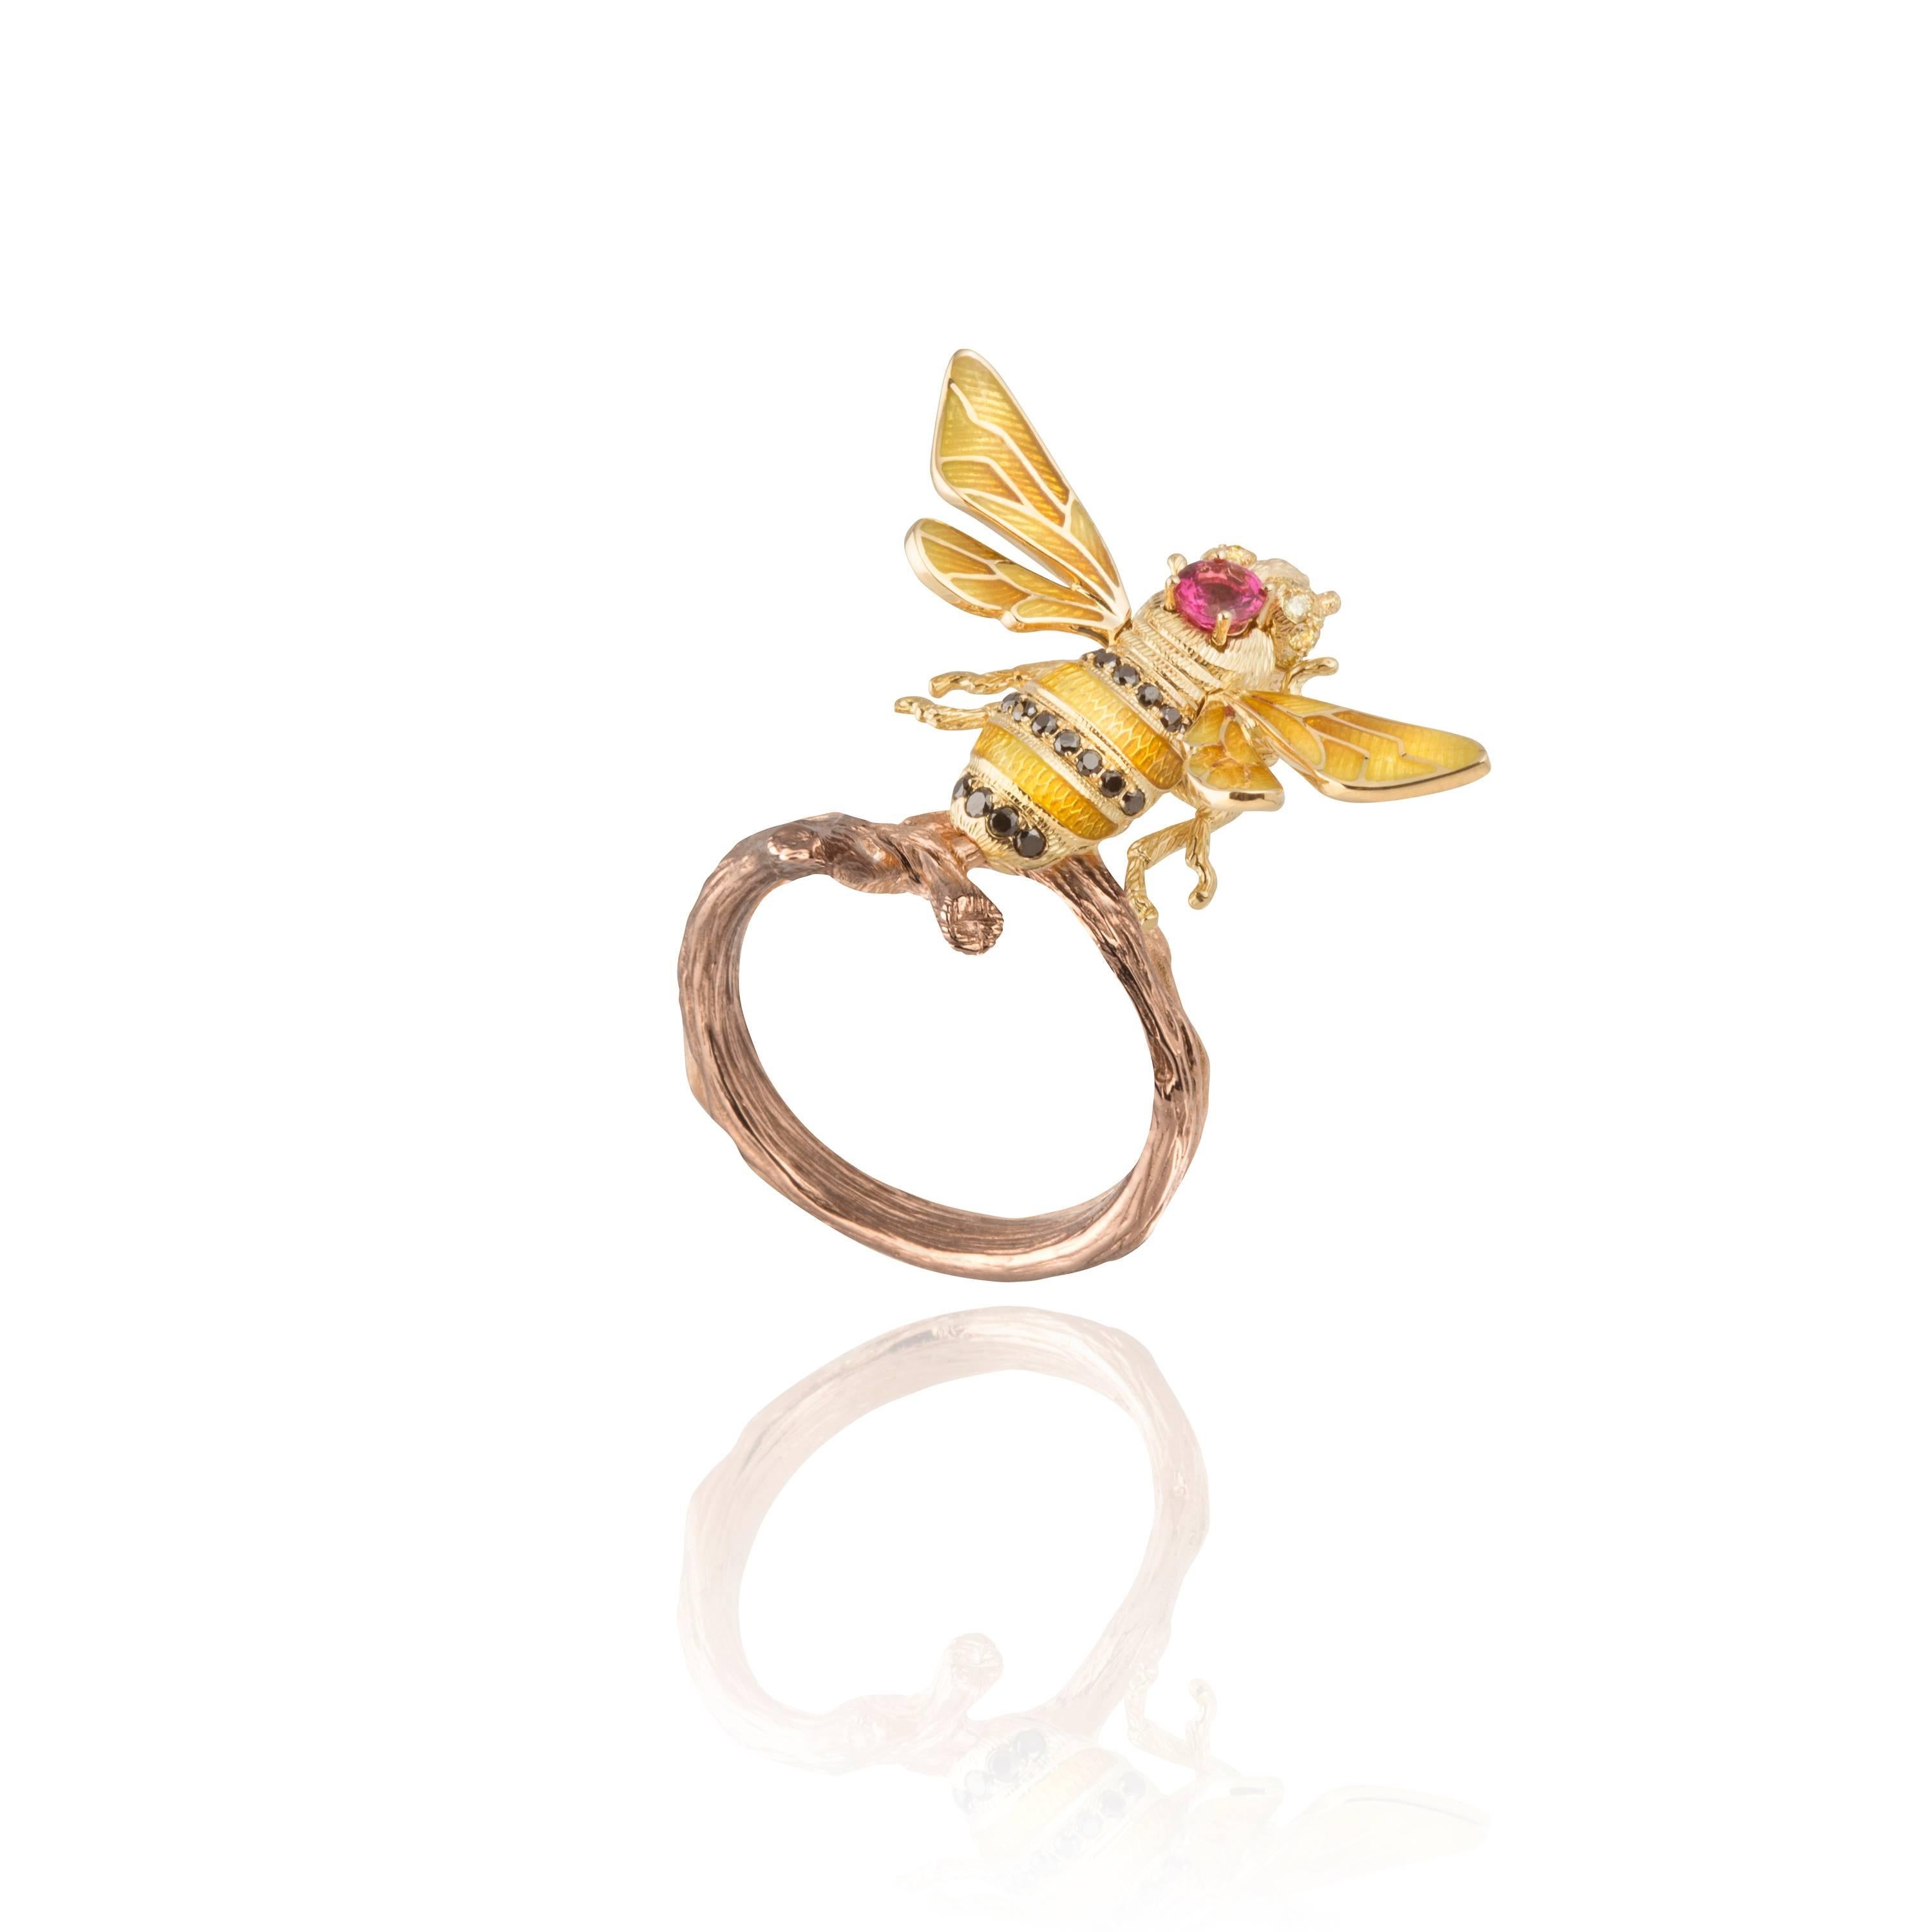 Simply buzzing with color and shine, the Bee Gold Ring is a luxe representation of one of nature’s most community-oriented insects, it is a poetic metaphor of all kinds of wealth and sweetness in life. An 18k gold bee sits center stage, its